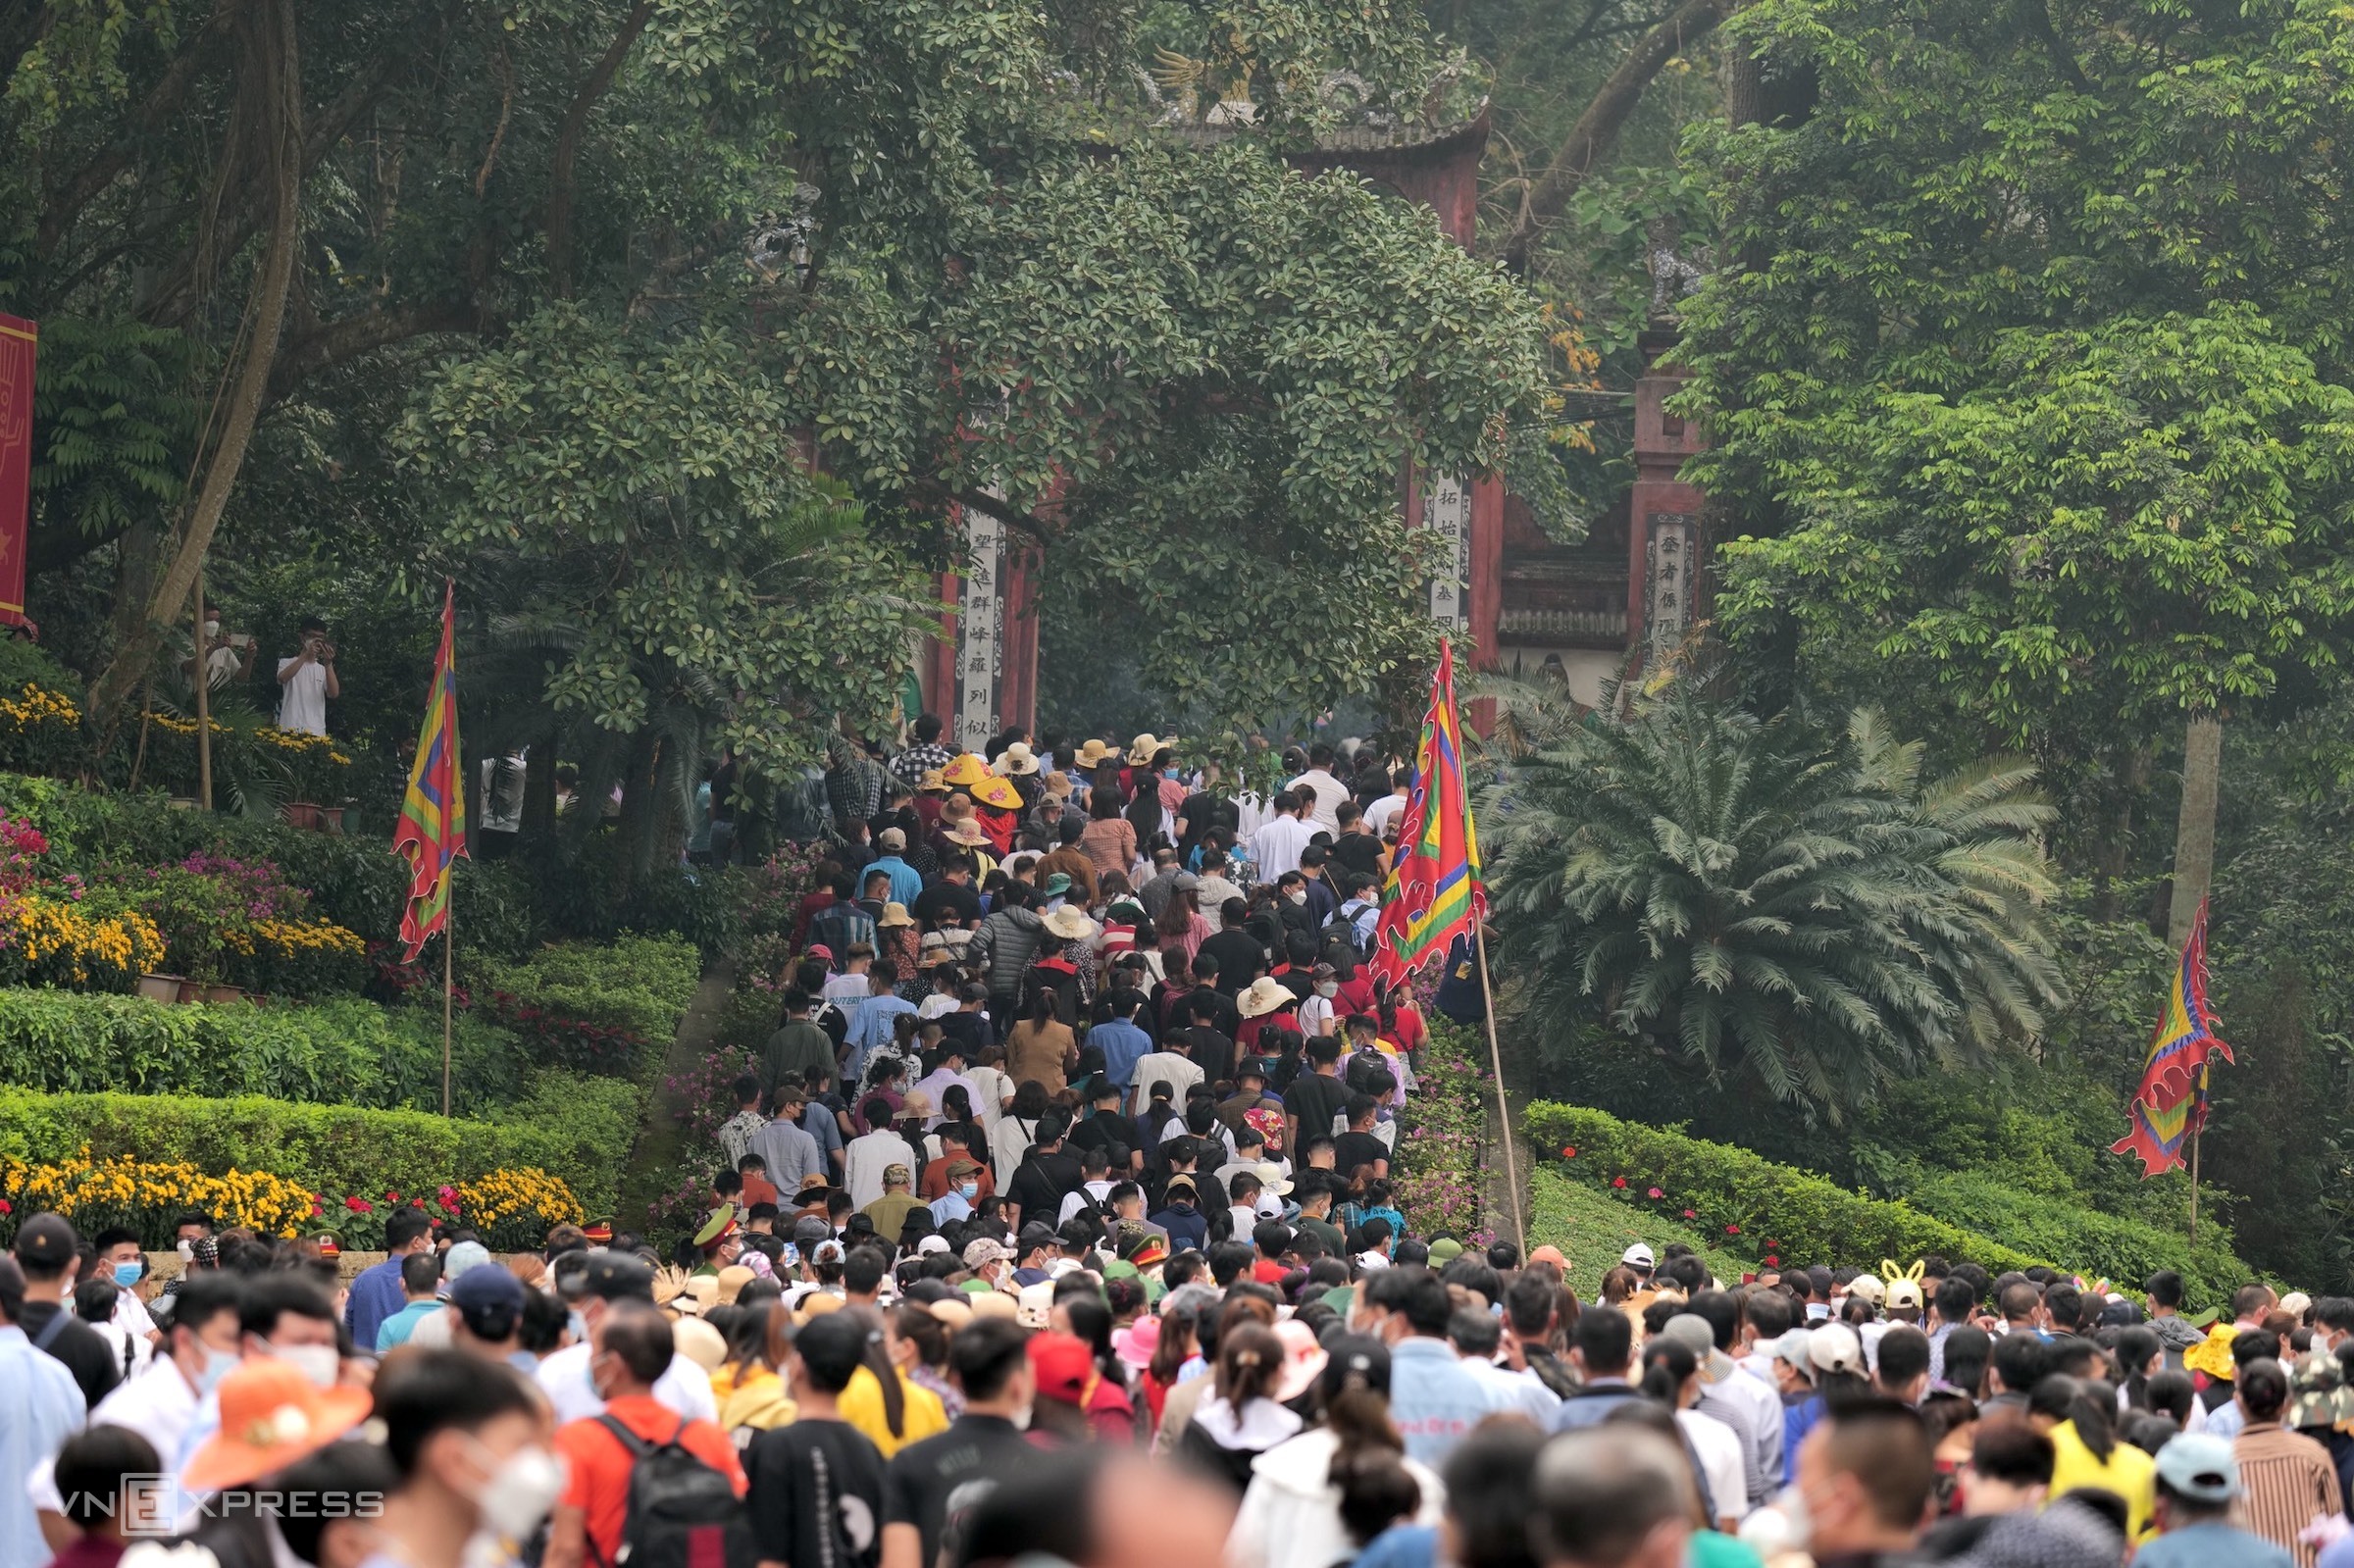 Hundreds of thousands of pilgrims flocked to the temple. With Covid-19 deemed under control across the country, pilgrims from various localities, including Hanoi, Ho Chi Minh City and Da Nang, thronged to pay their tributes to the nation’s founders and seek their blessings.